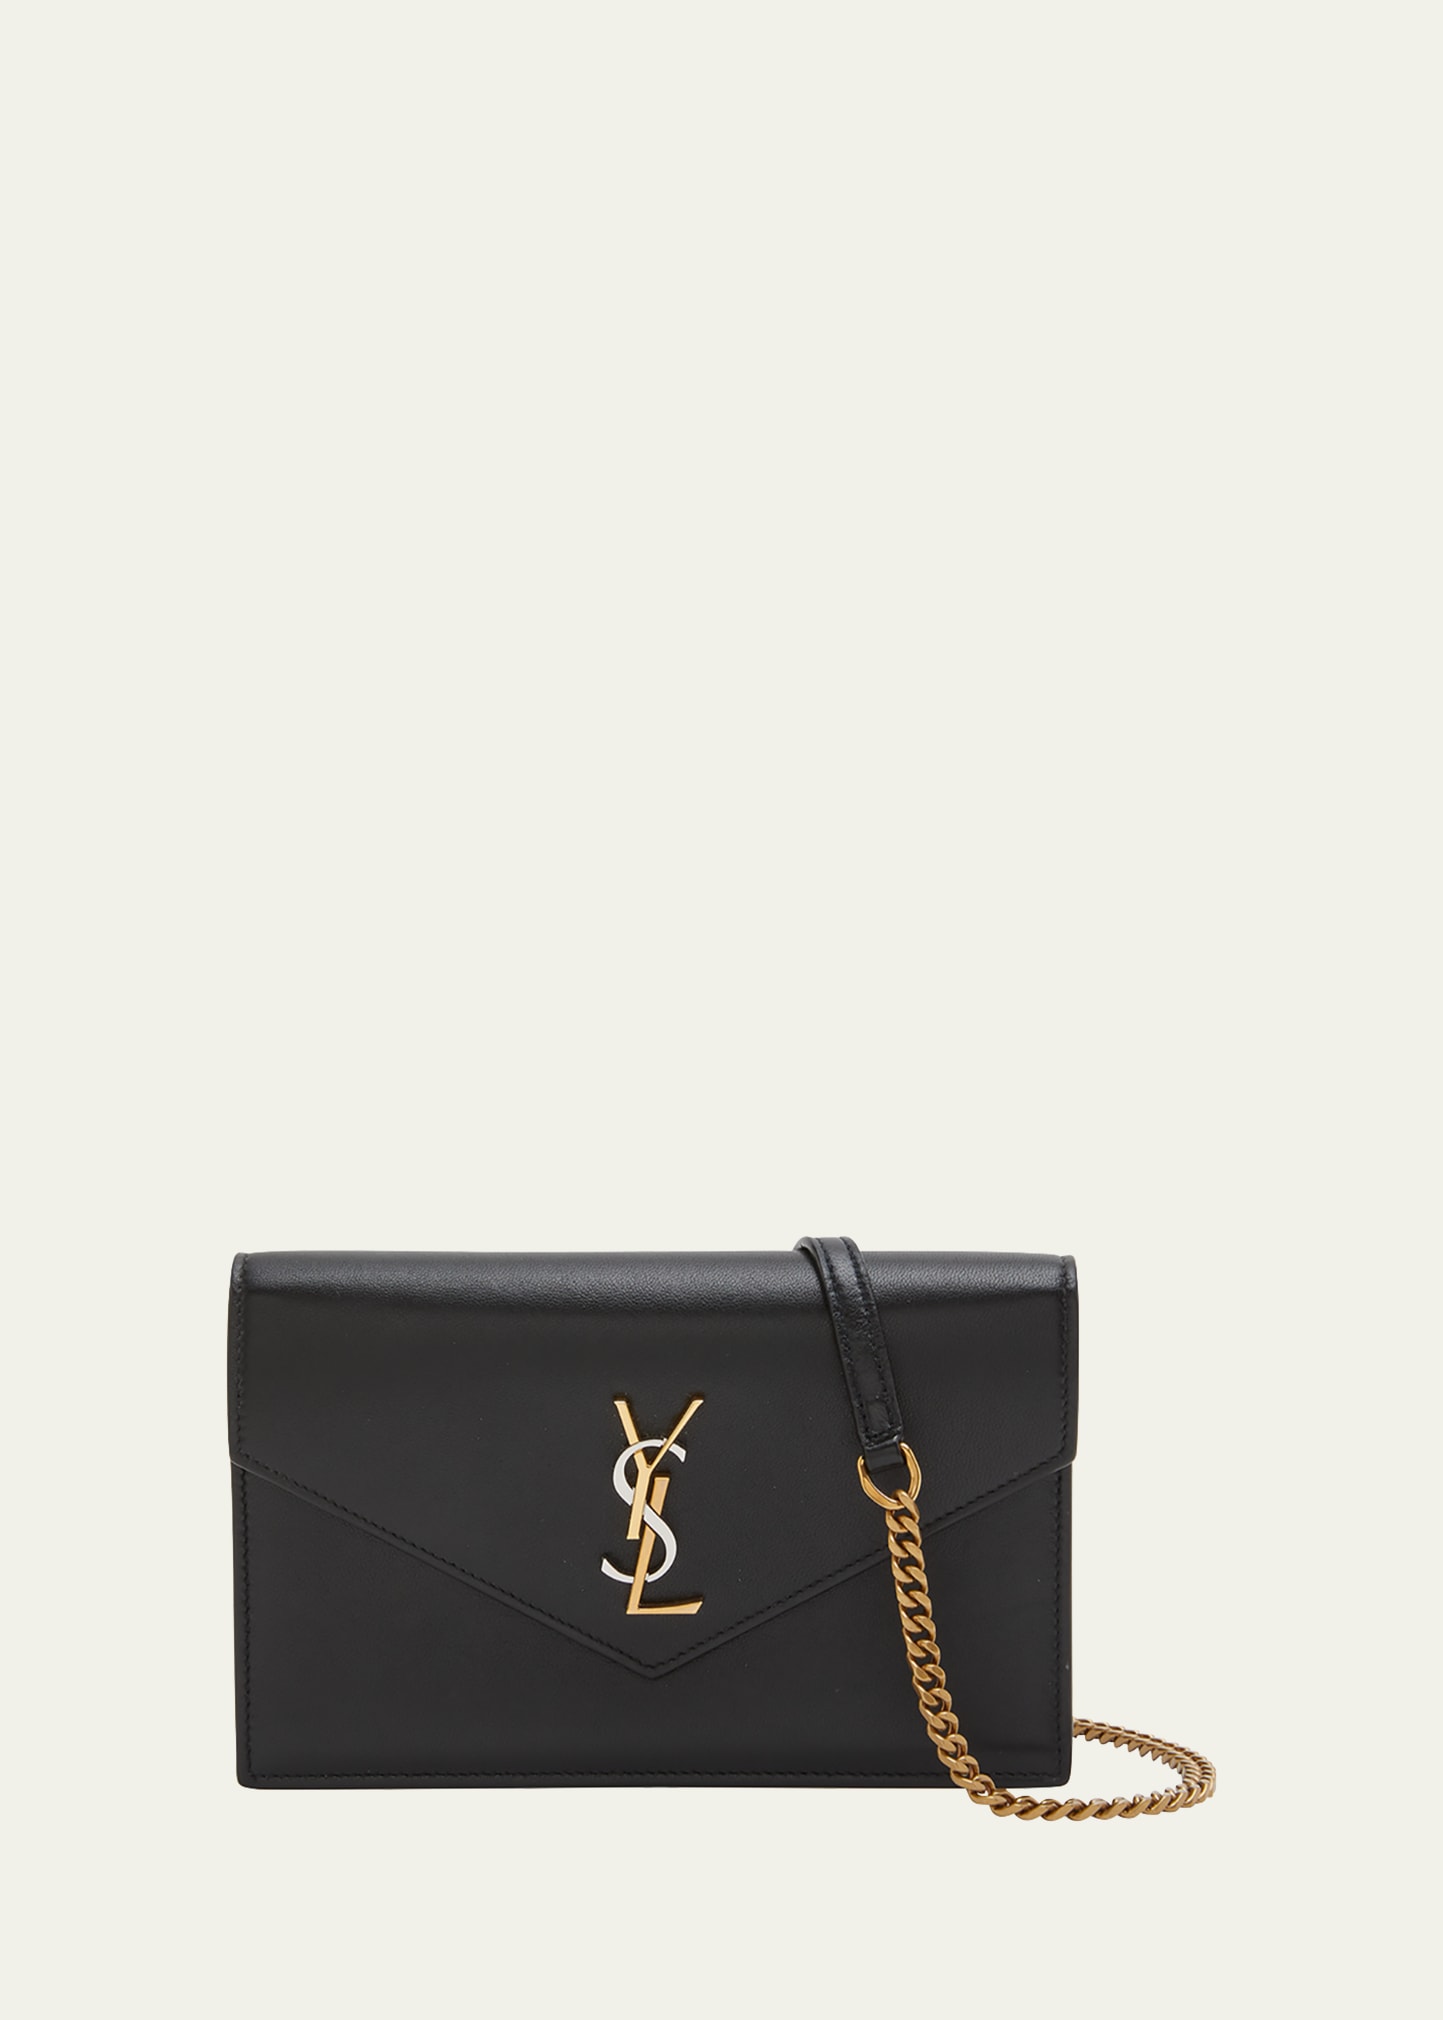 NTWRK - Yves Saint Laurent White Leather Double Sided Wallet On Chain Cr